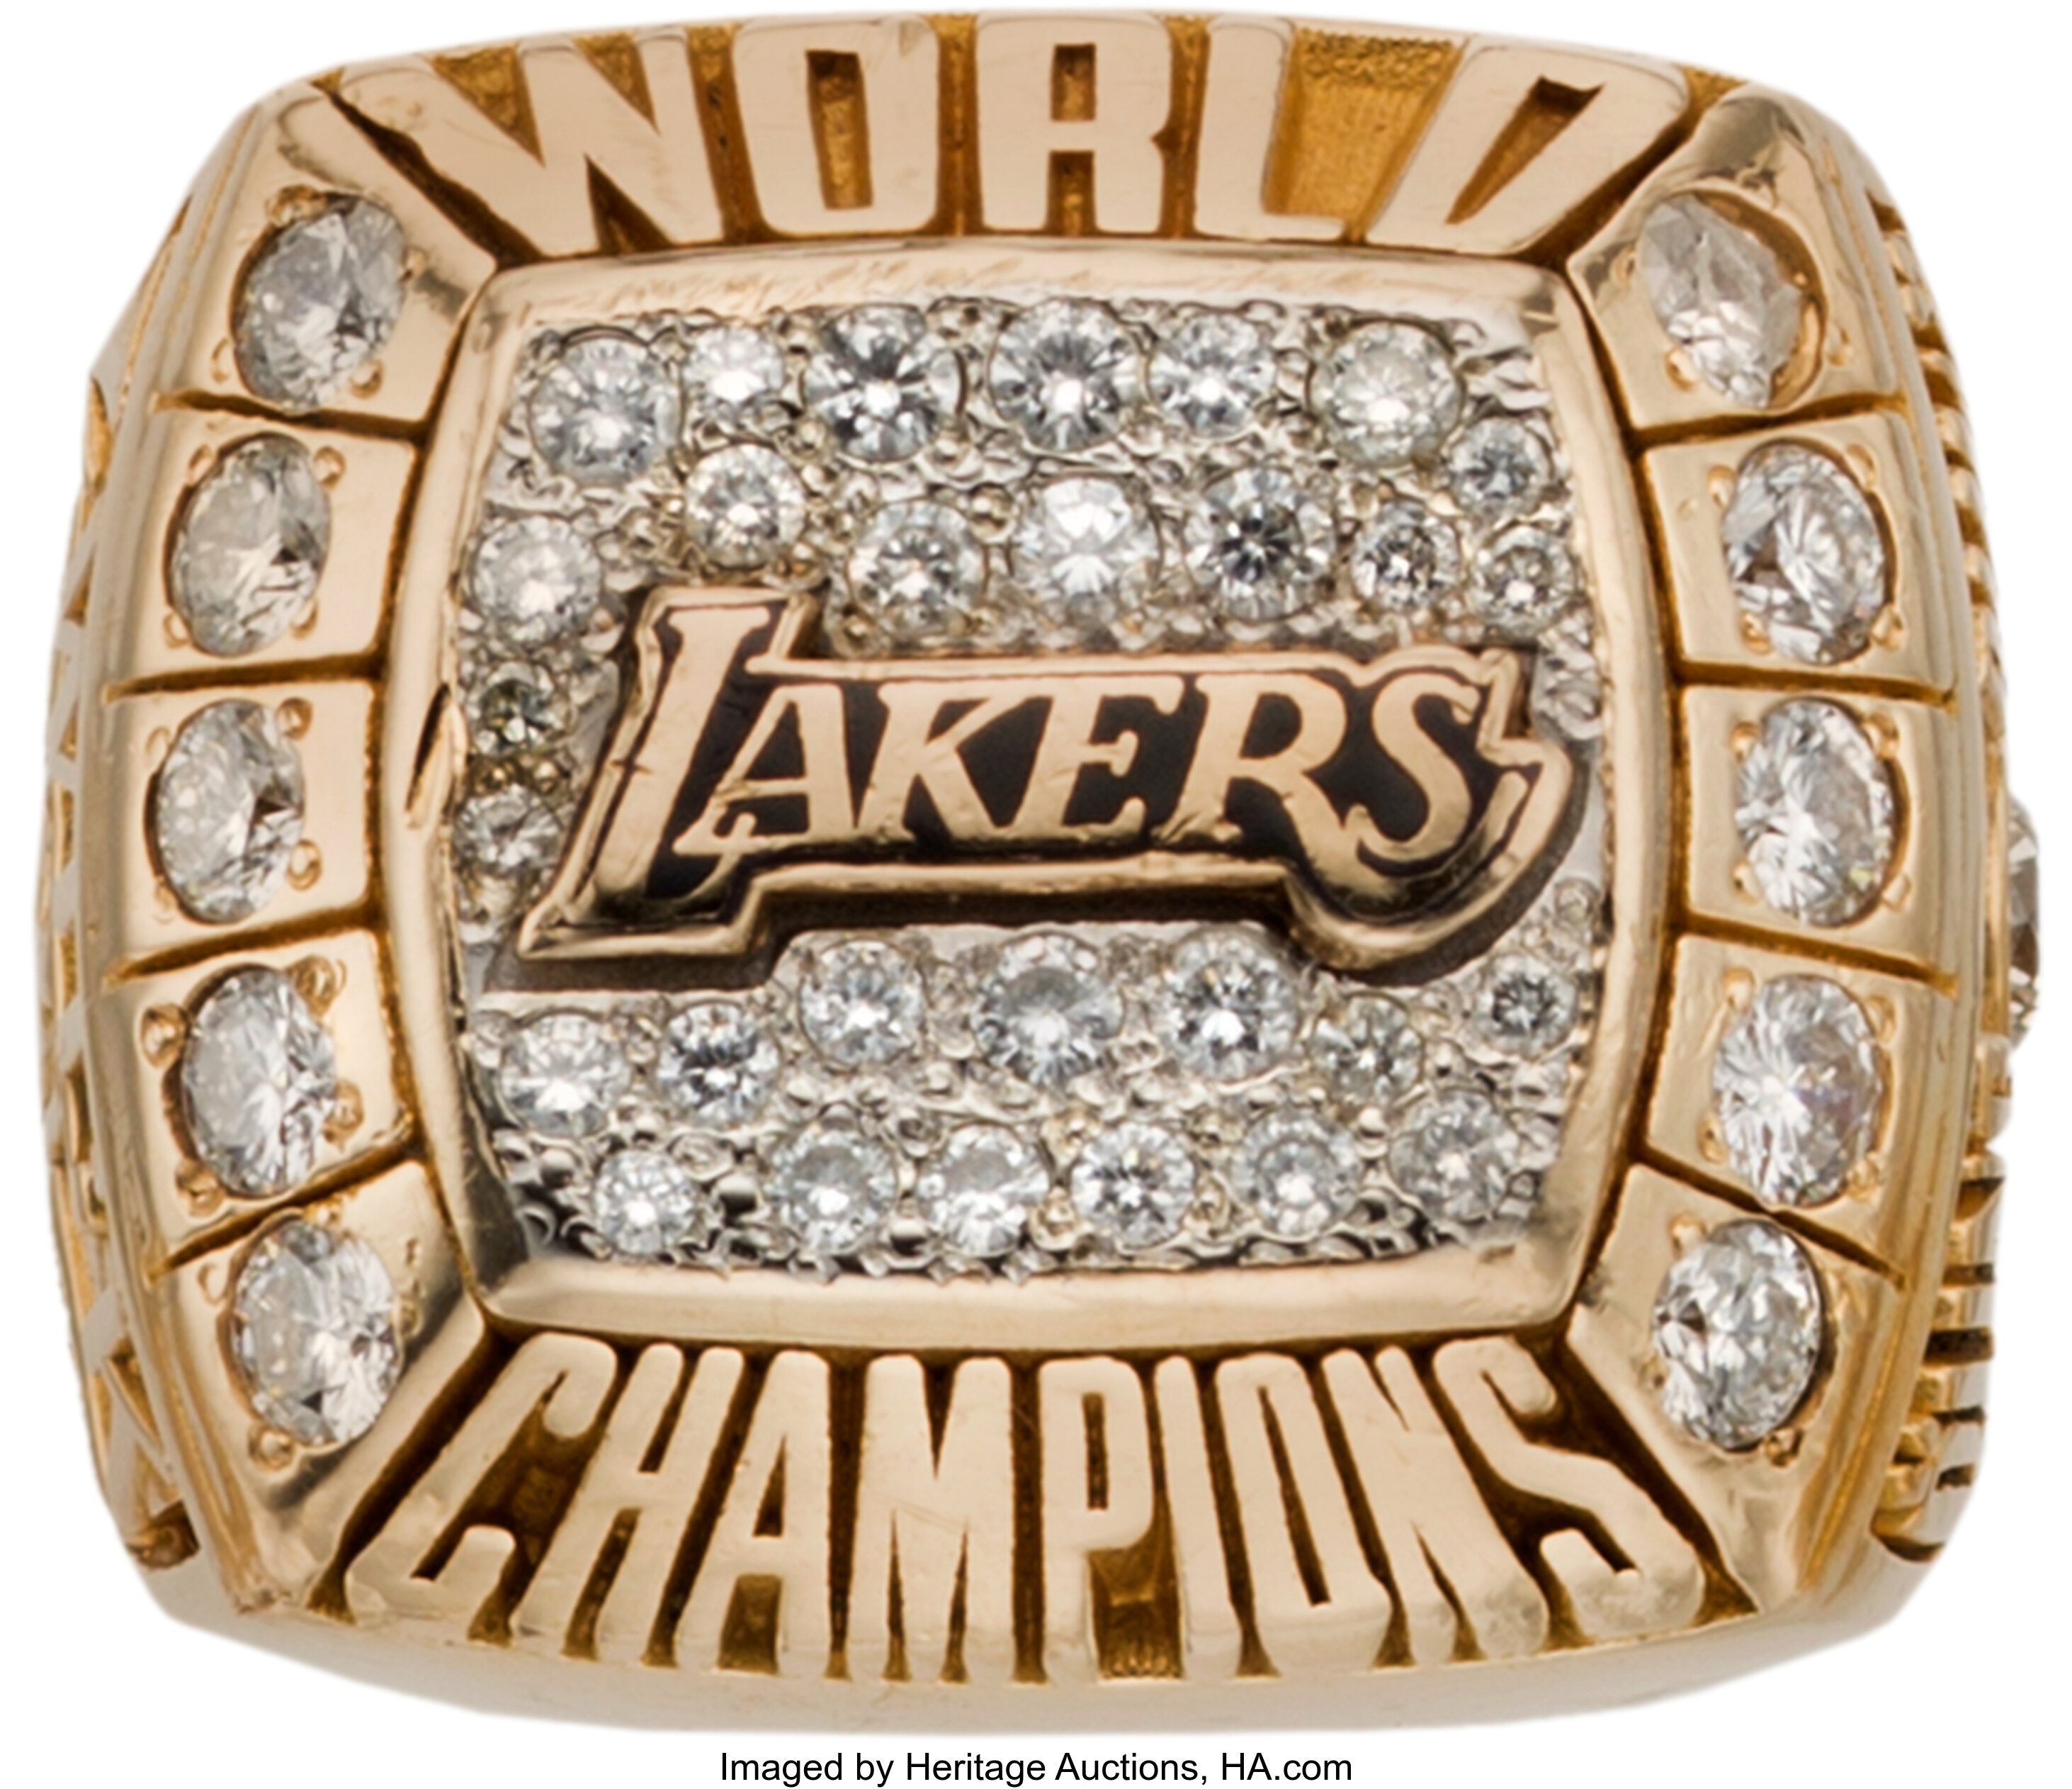 2000 Los Angeles Lakers Nba Championship Ring Basketball Lot 80119 Heritage Auctions